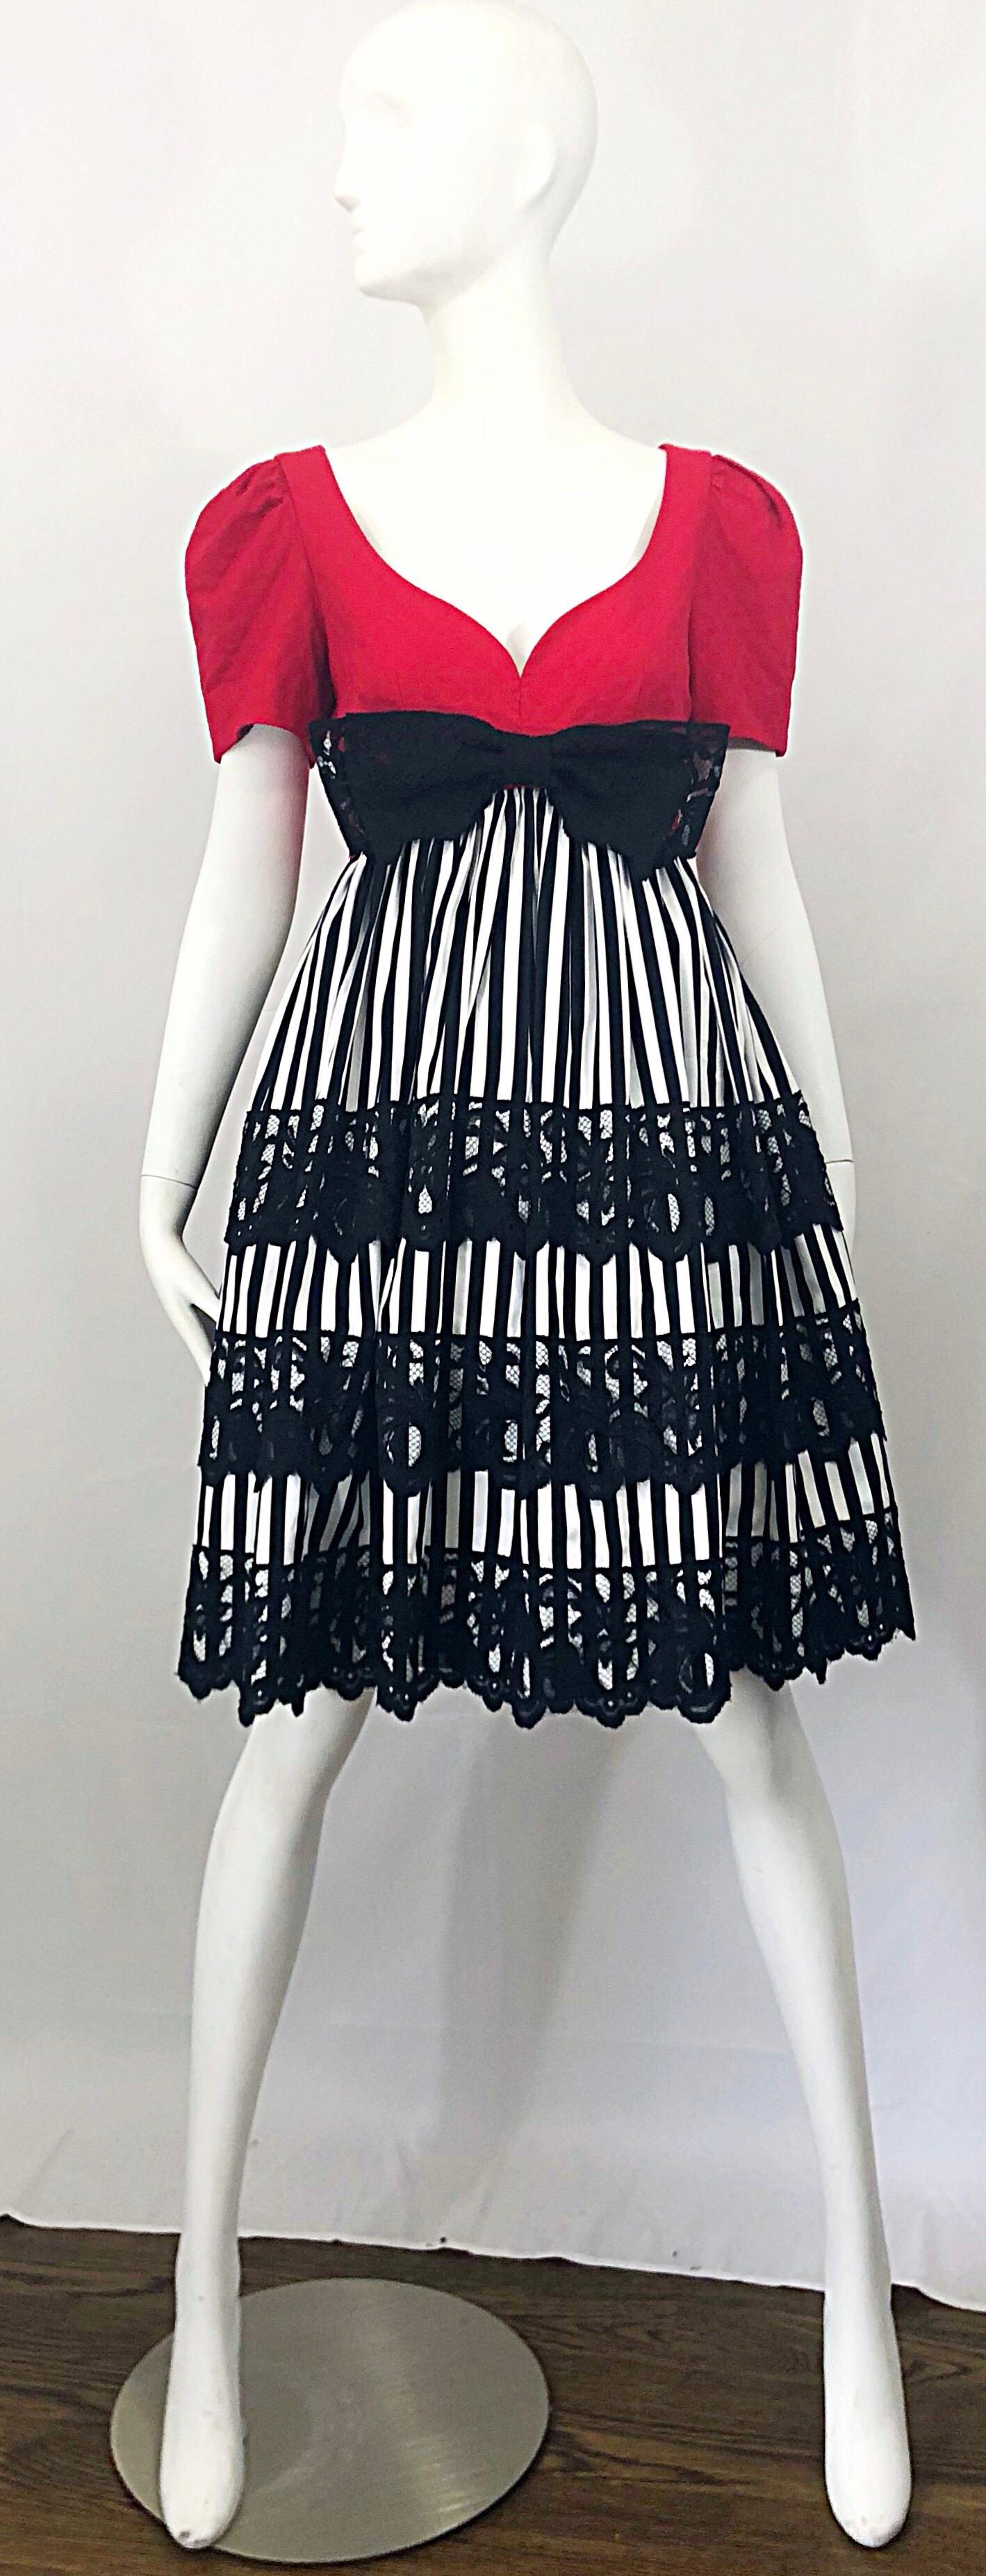 Insanely chic vintage 1980s / 80s ADELE SIMPSON red, black and white fit n' flare cocktail dress! Features a fitted red cotton pique bodice with a sweetheart neckline. Empire waist with a black and white striped silk skirt. Three black lace panels